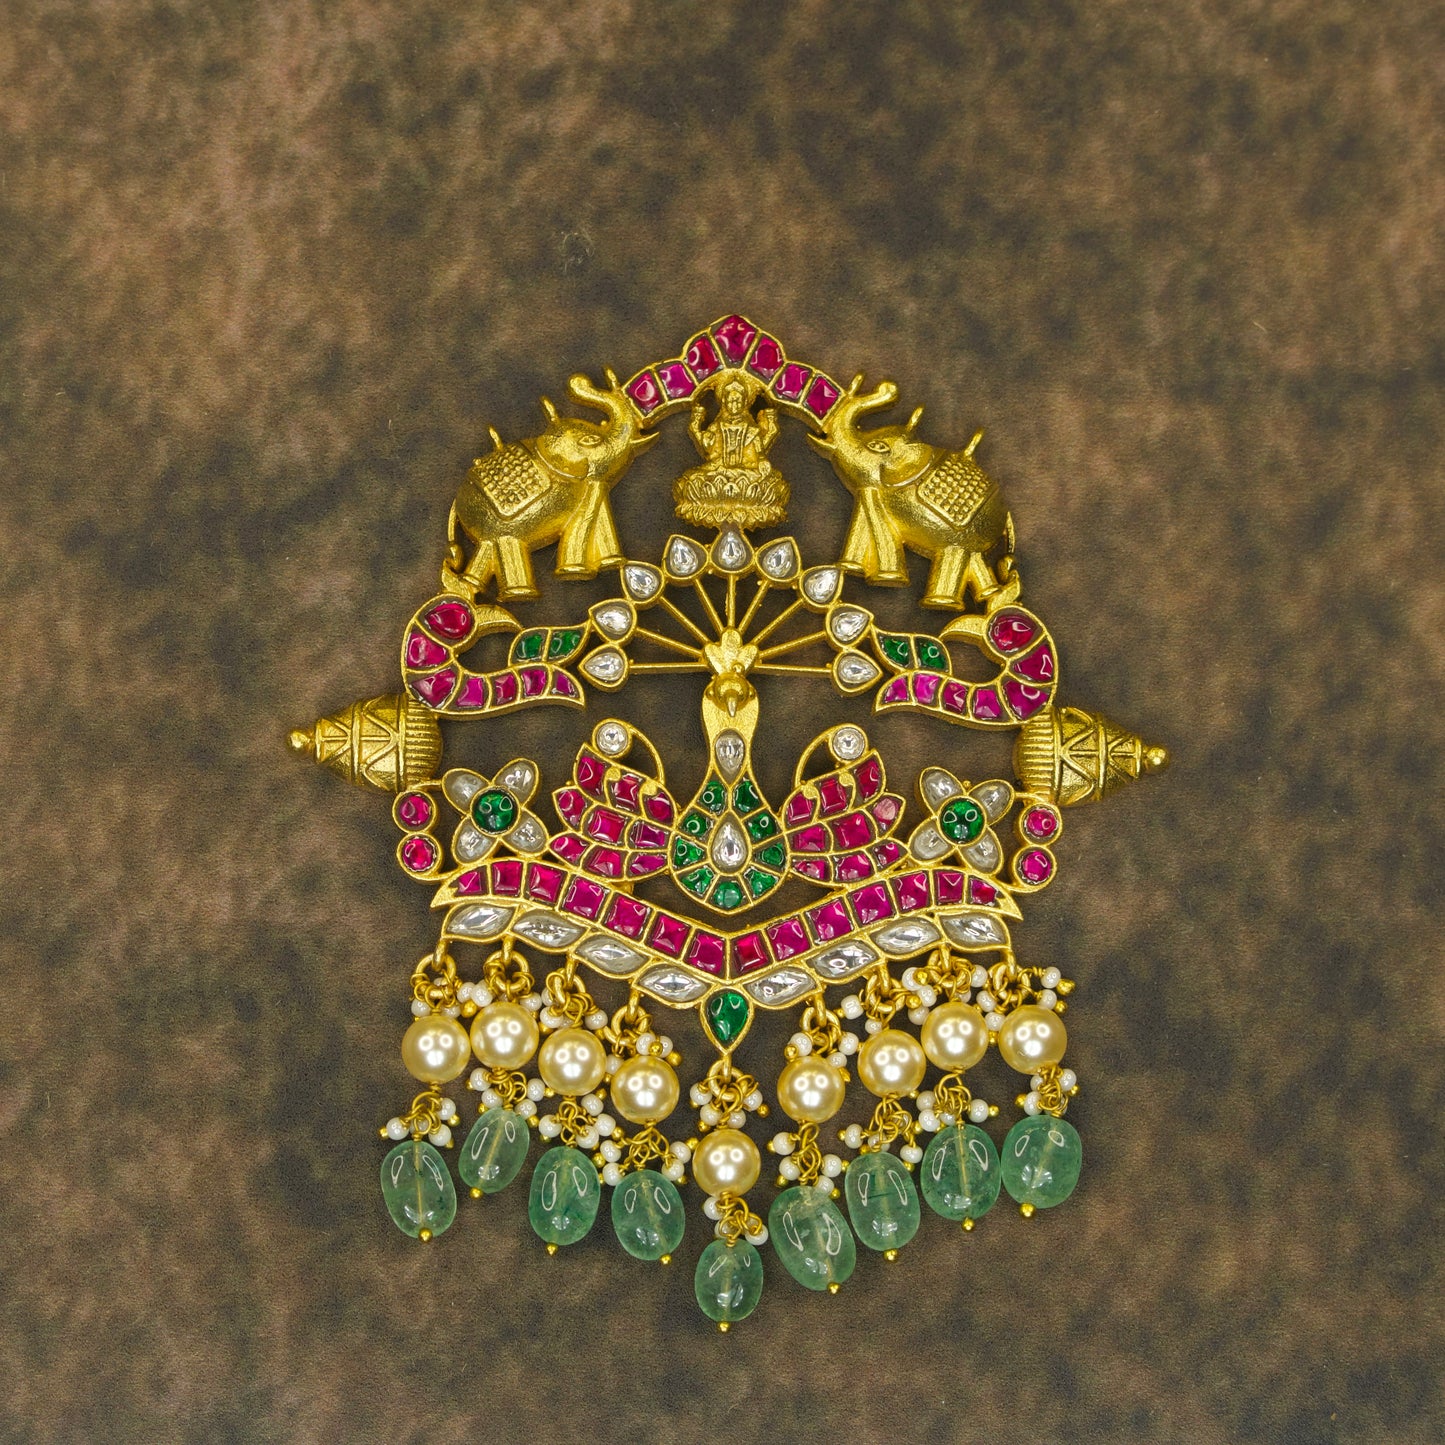 Handcrafted Jadau Kundan Pendant, with uncut Ruby and Emerald gemstones, pearls, beads, elephant & peacock motifs, in a 22k gold plating. 